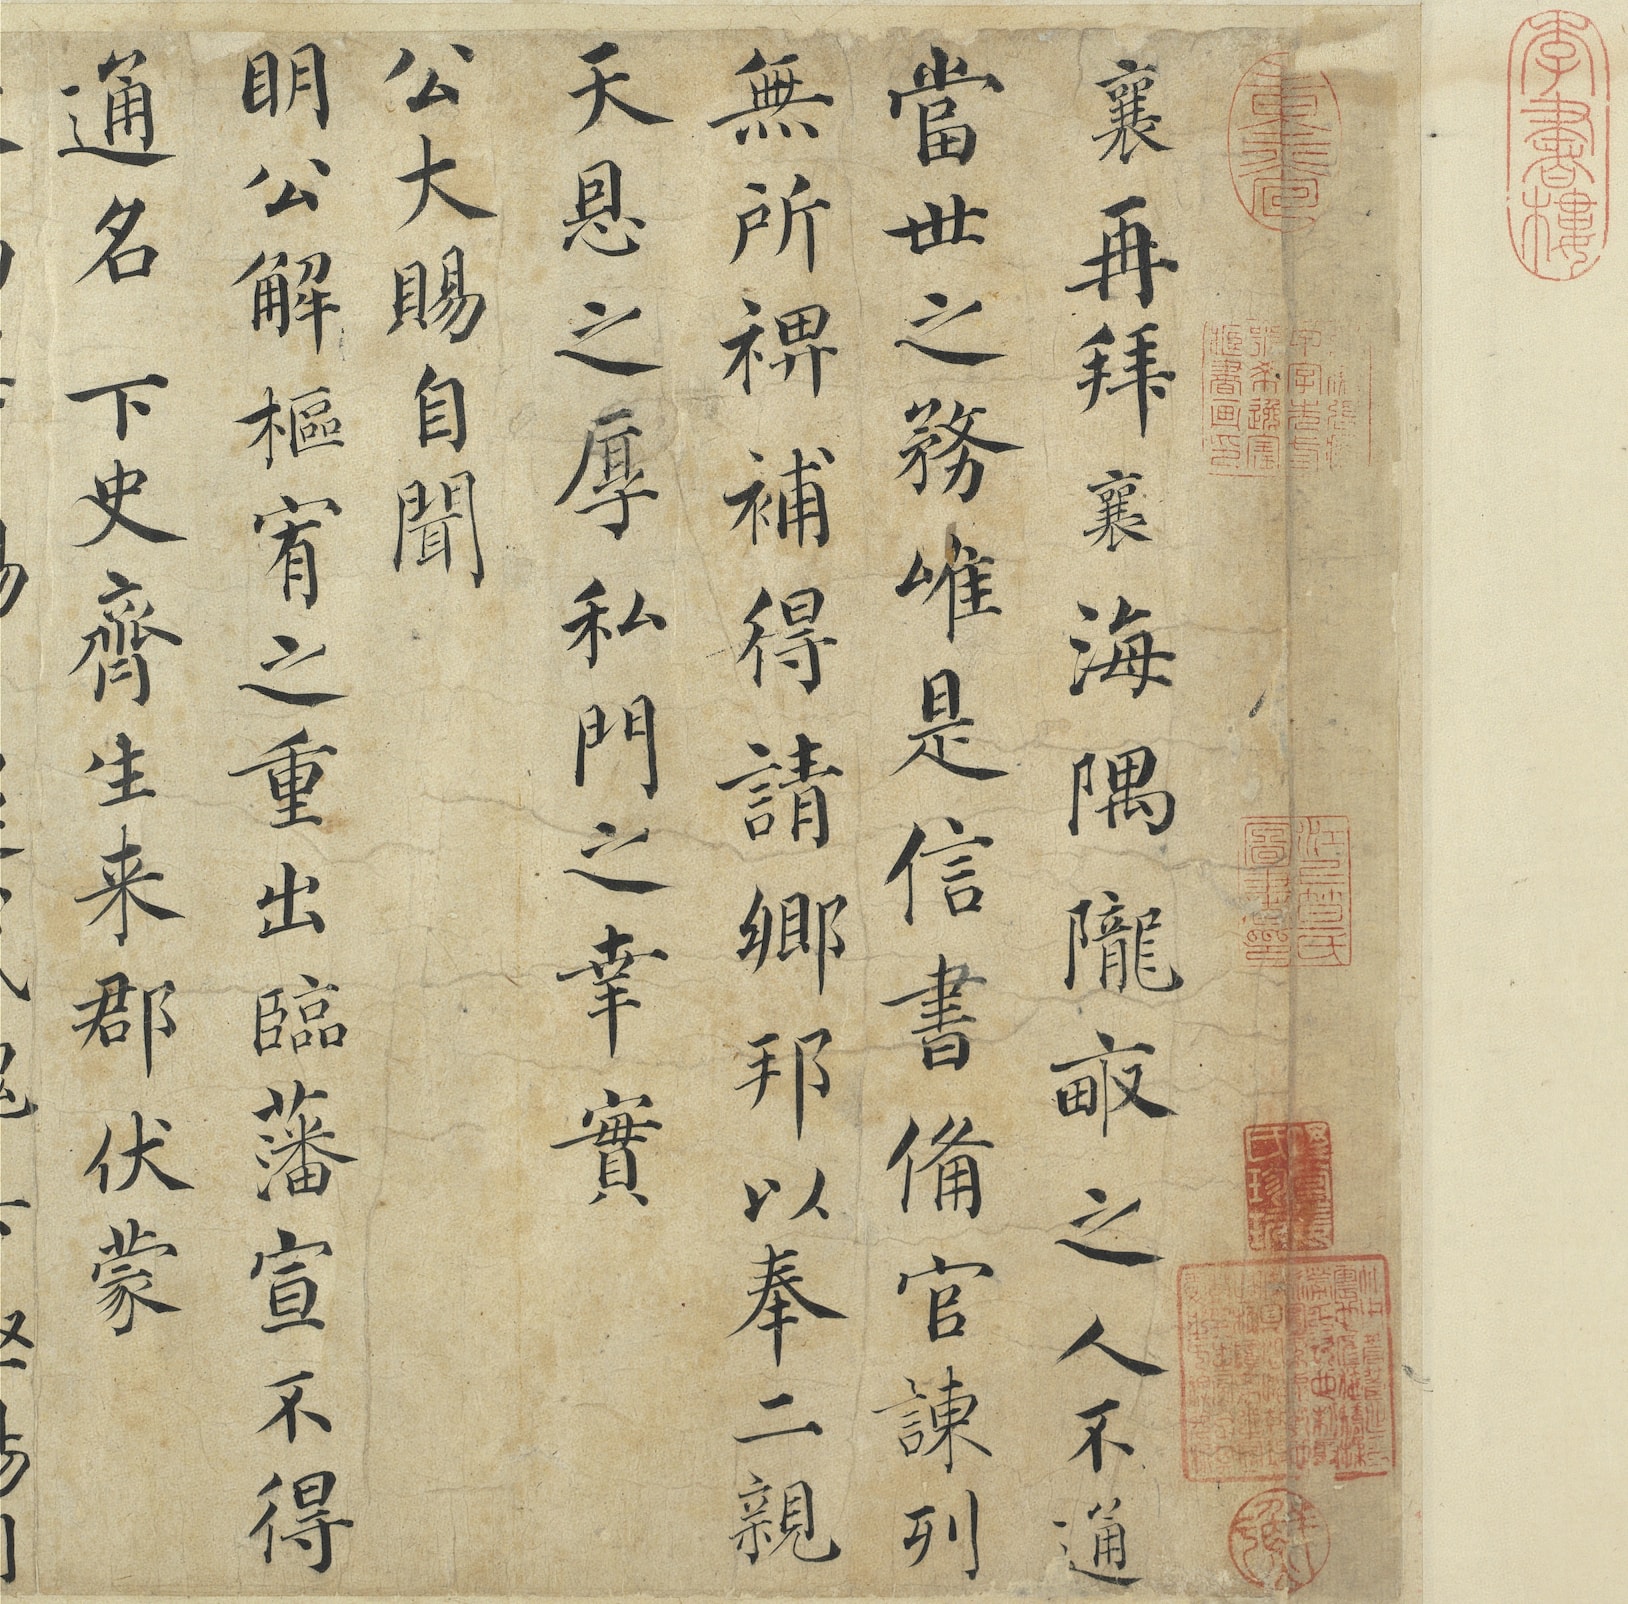 Calligraphy of the Four Song Masters